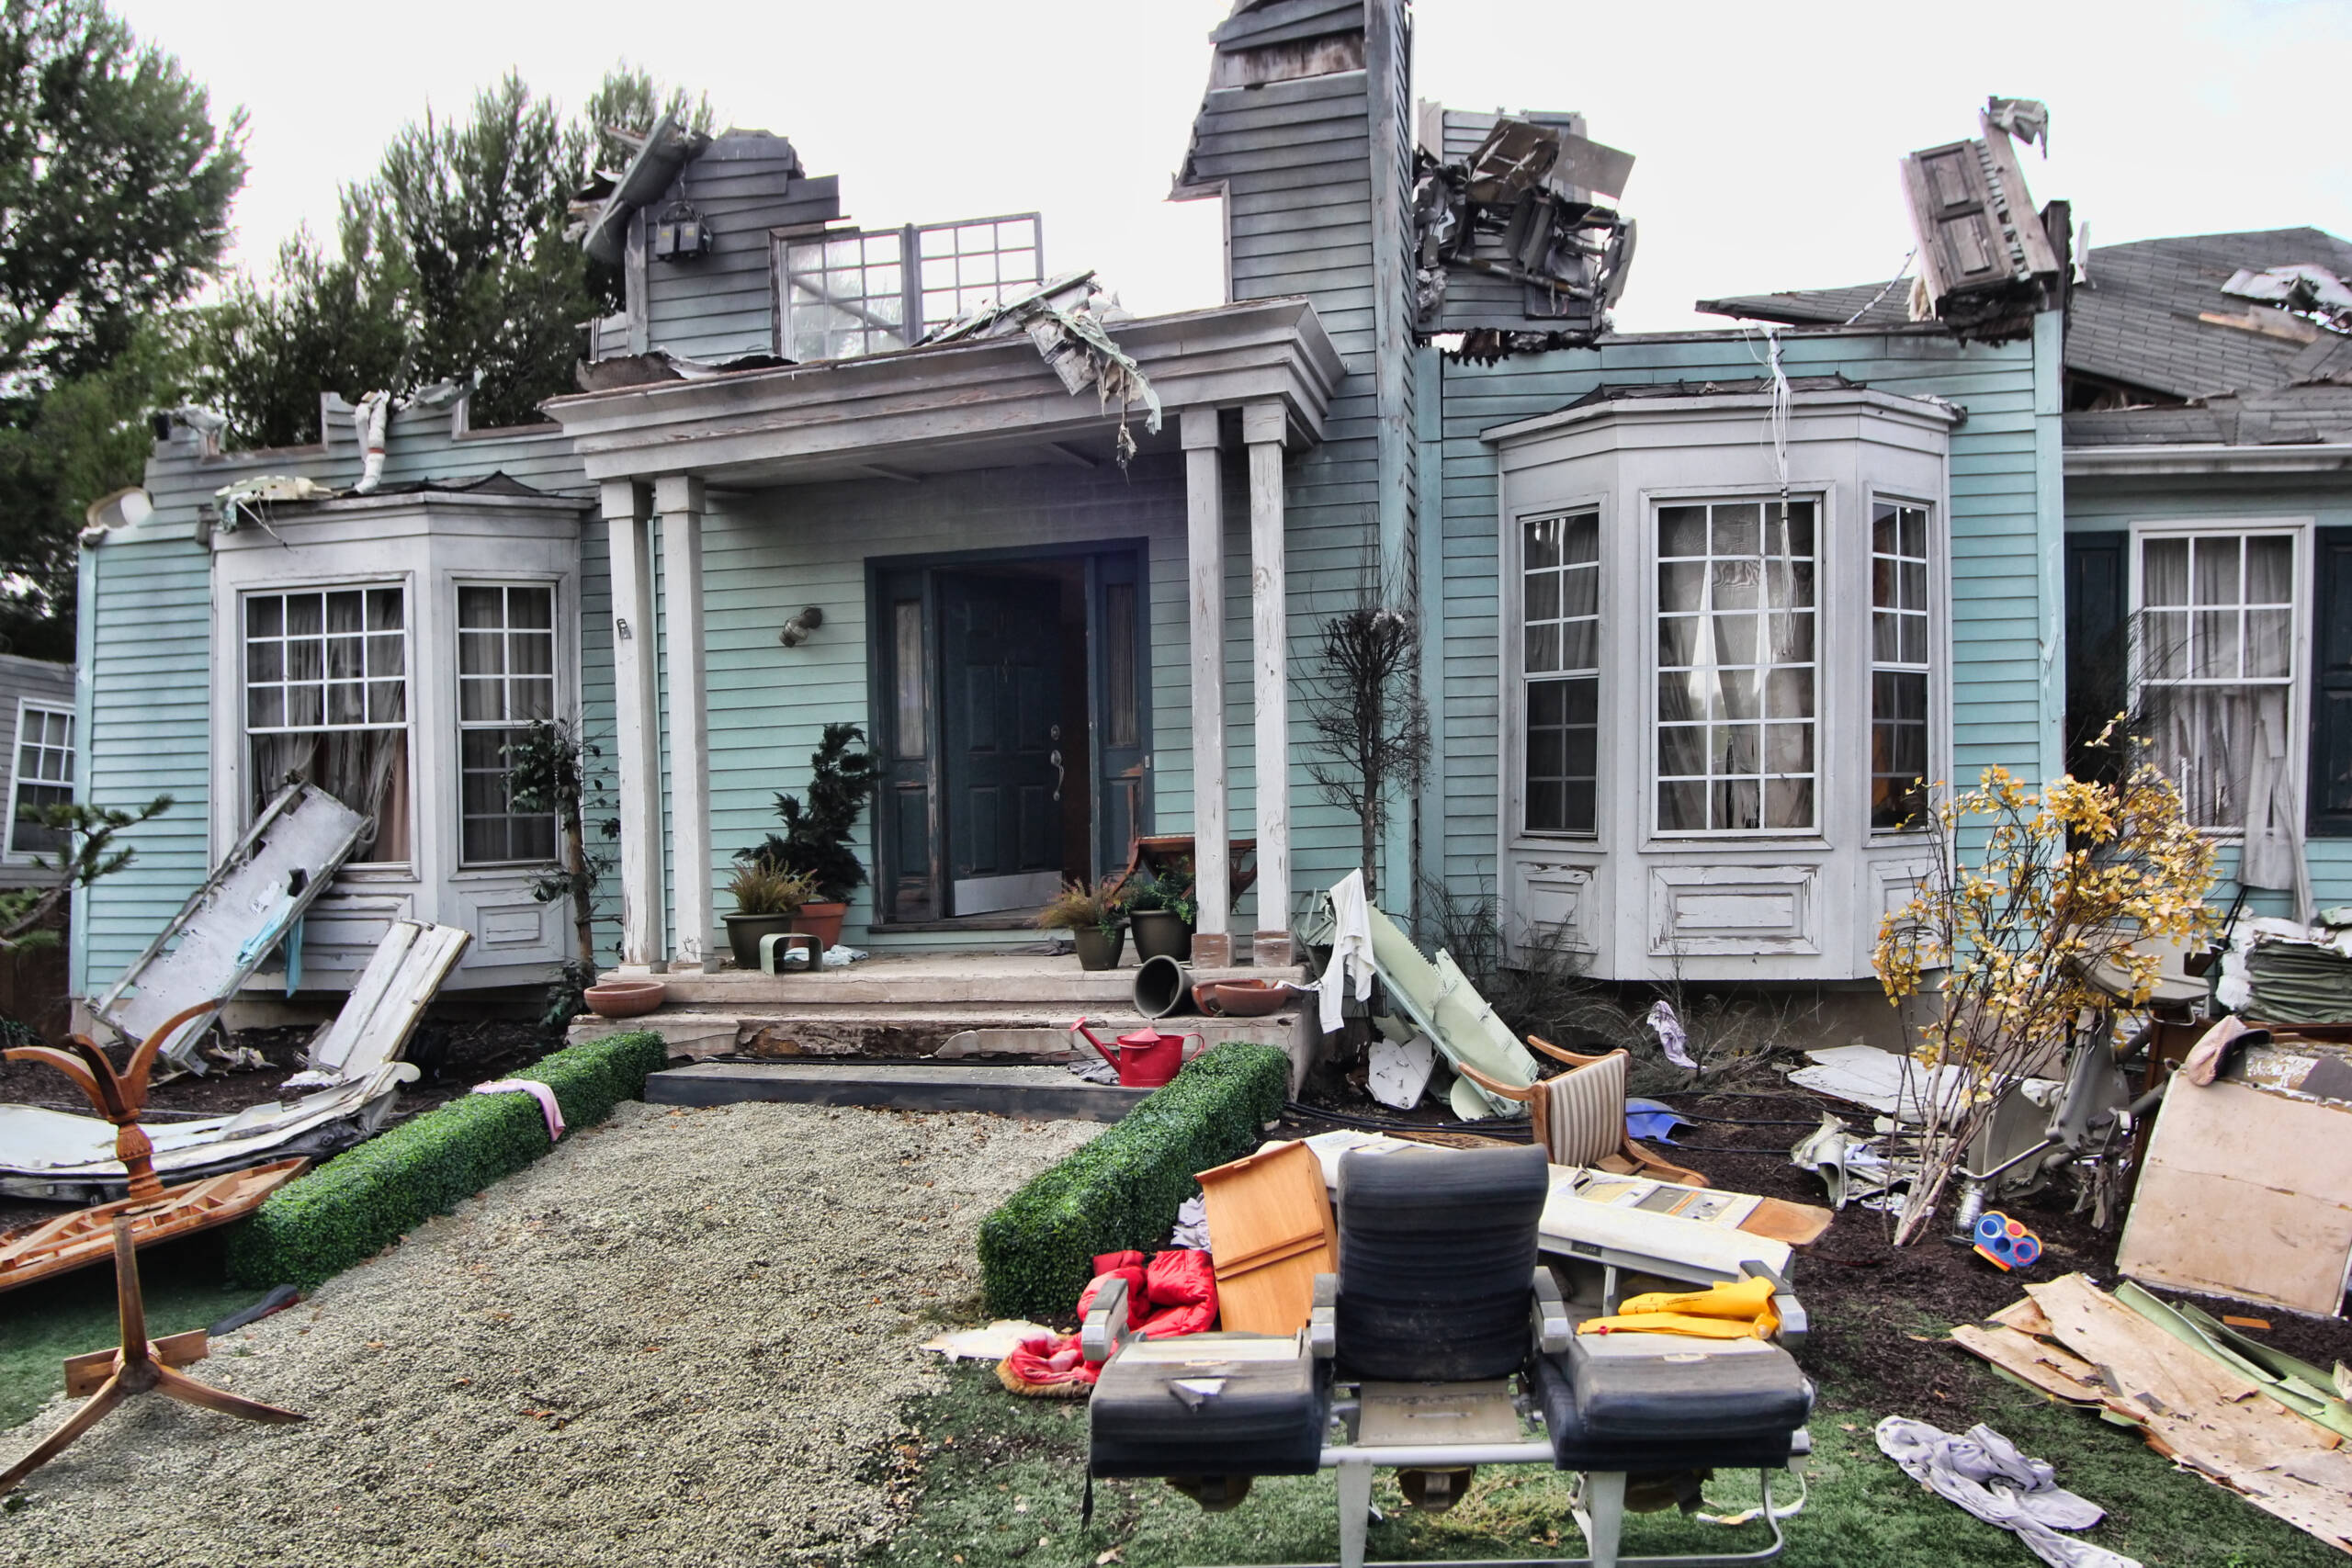 House damaged by disaster. Scenery for cinema